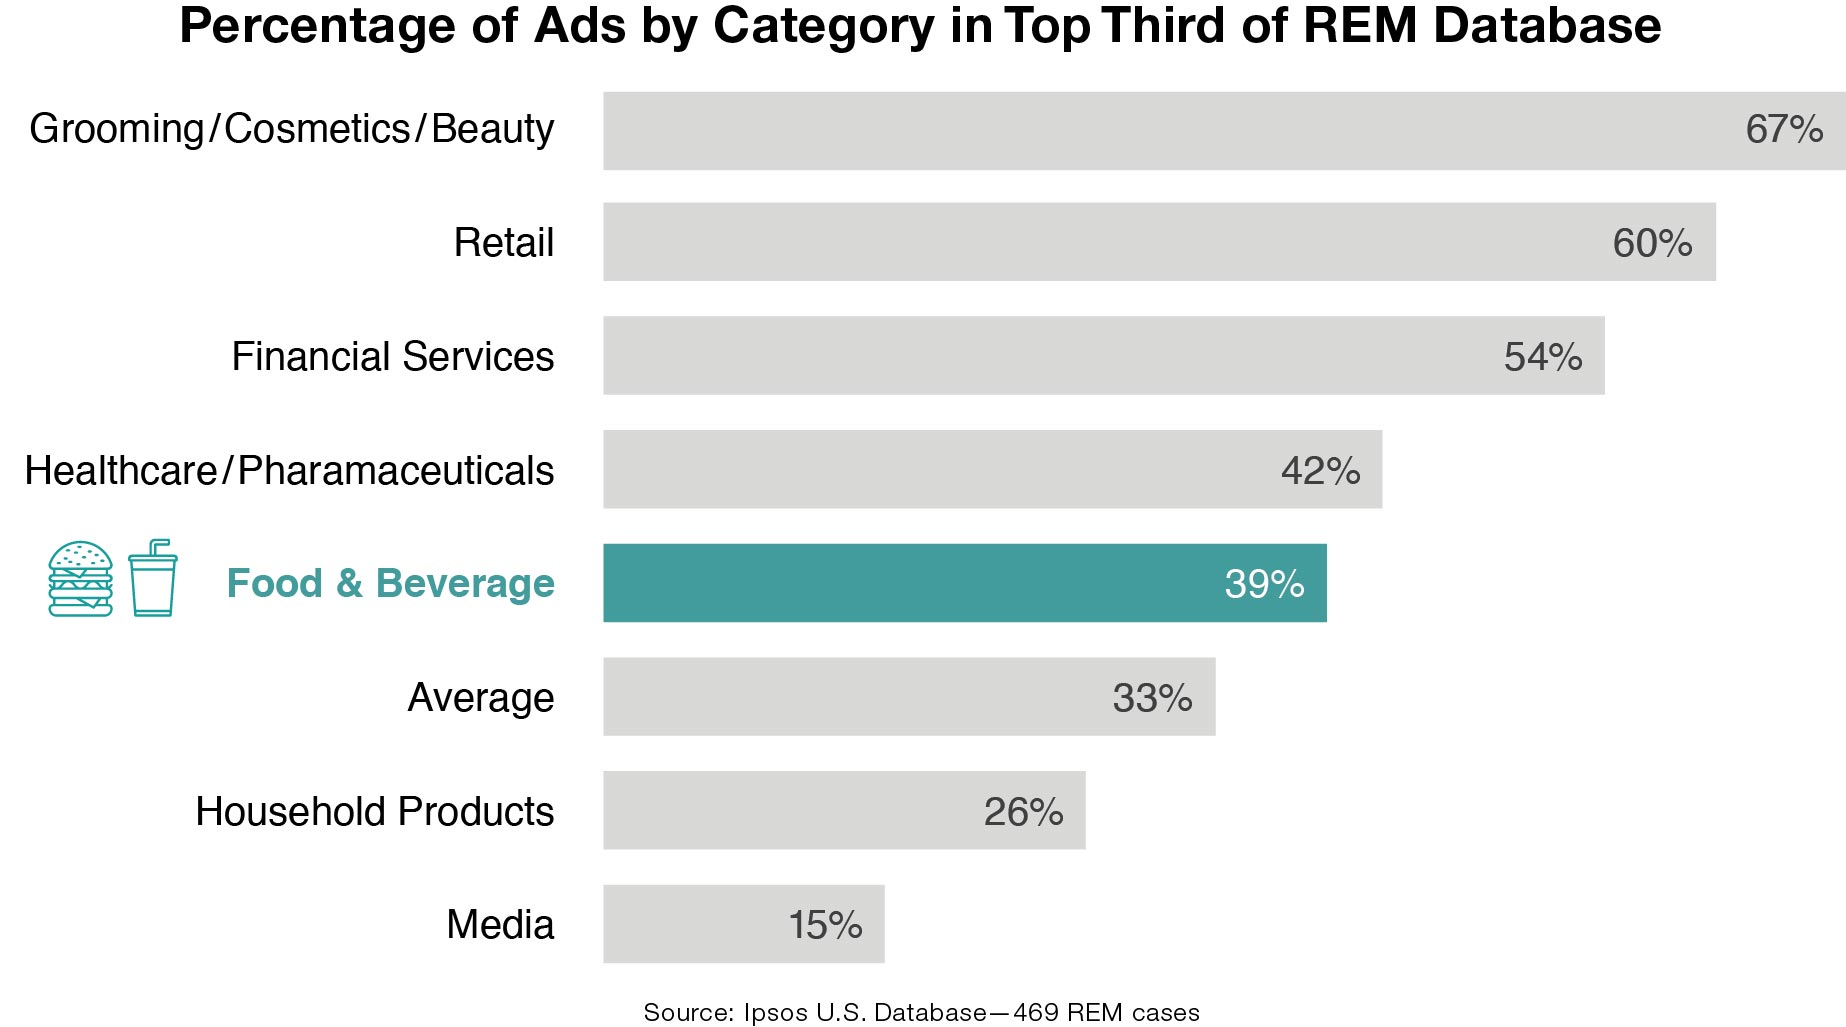 Percentage of Ads by Category in Top Third of REM Database